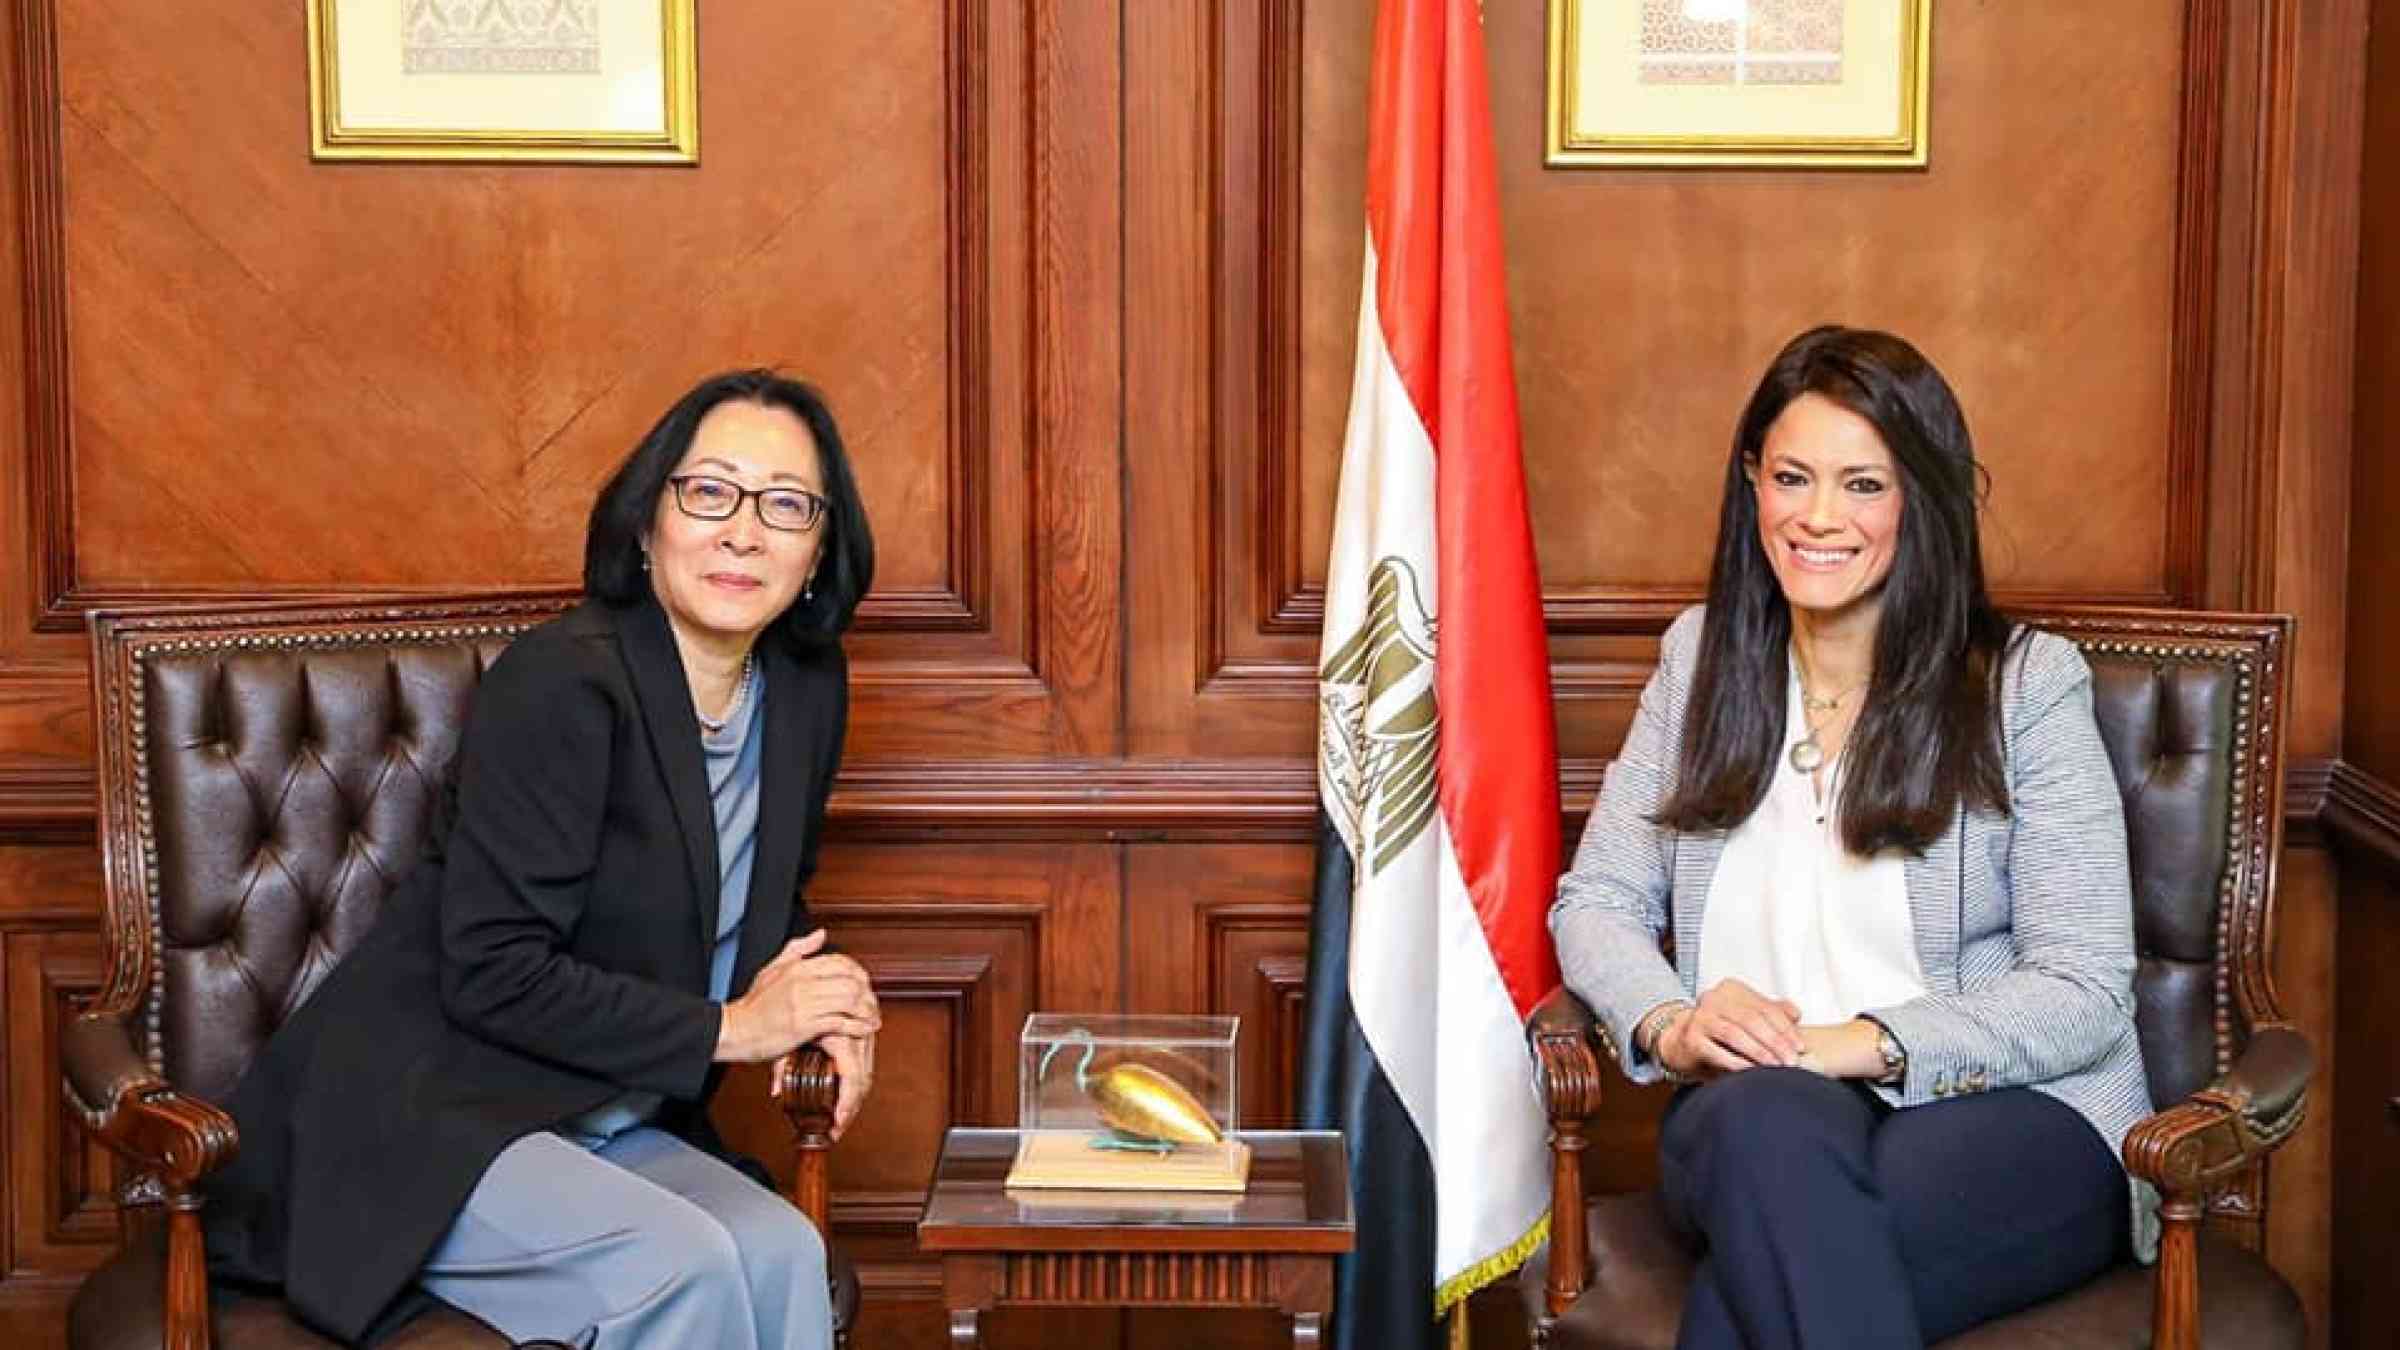 SRSG and H.E. Dr. Rania A. Al-Mashat  Minister of International Cooperation  